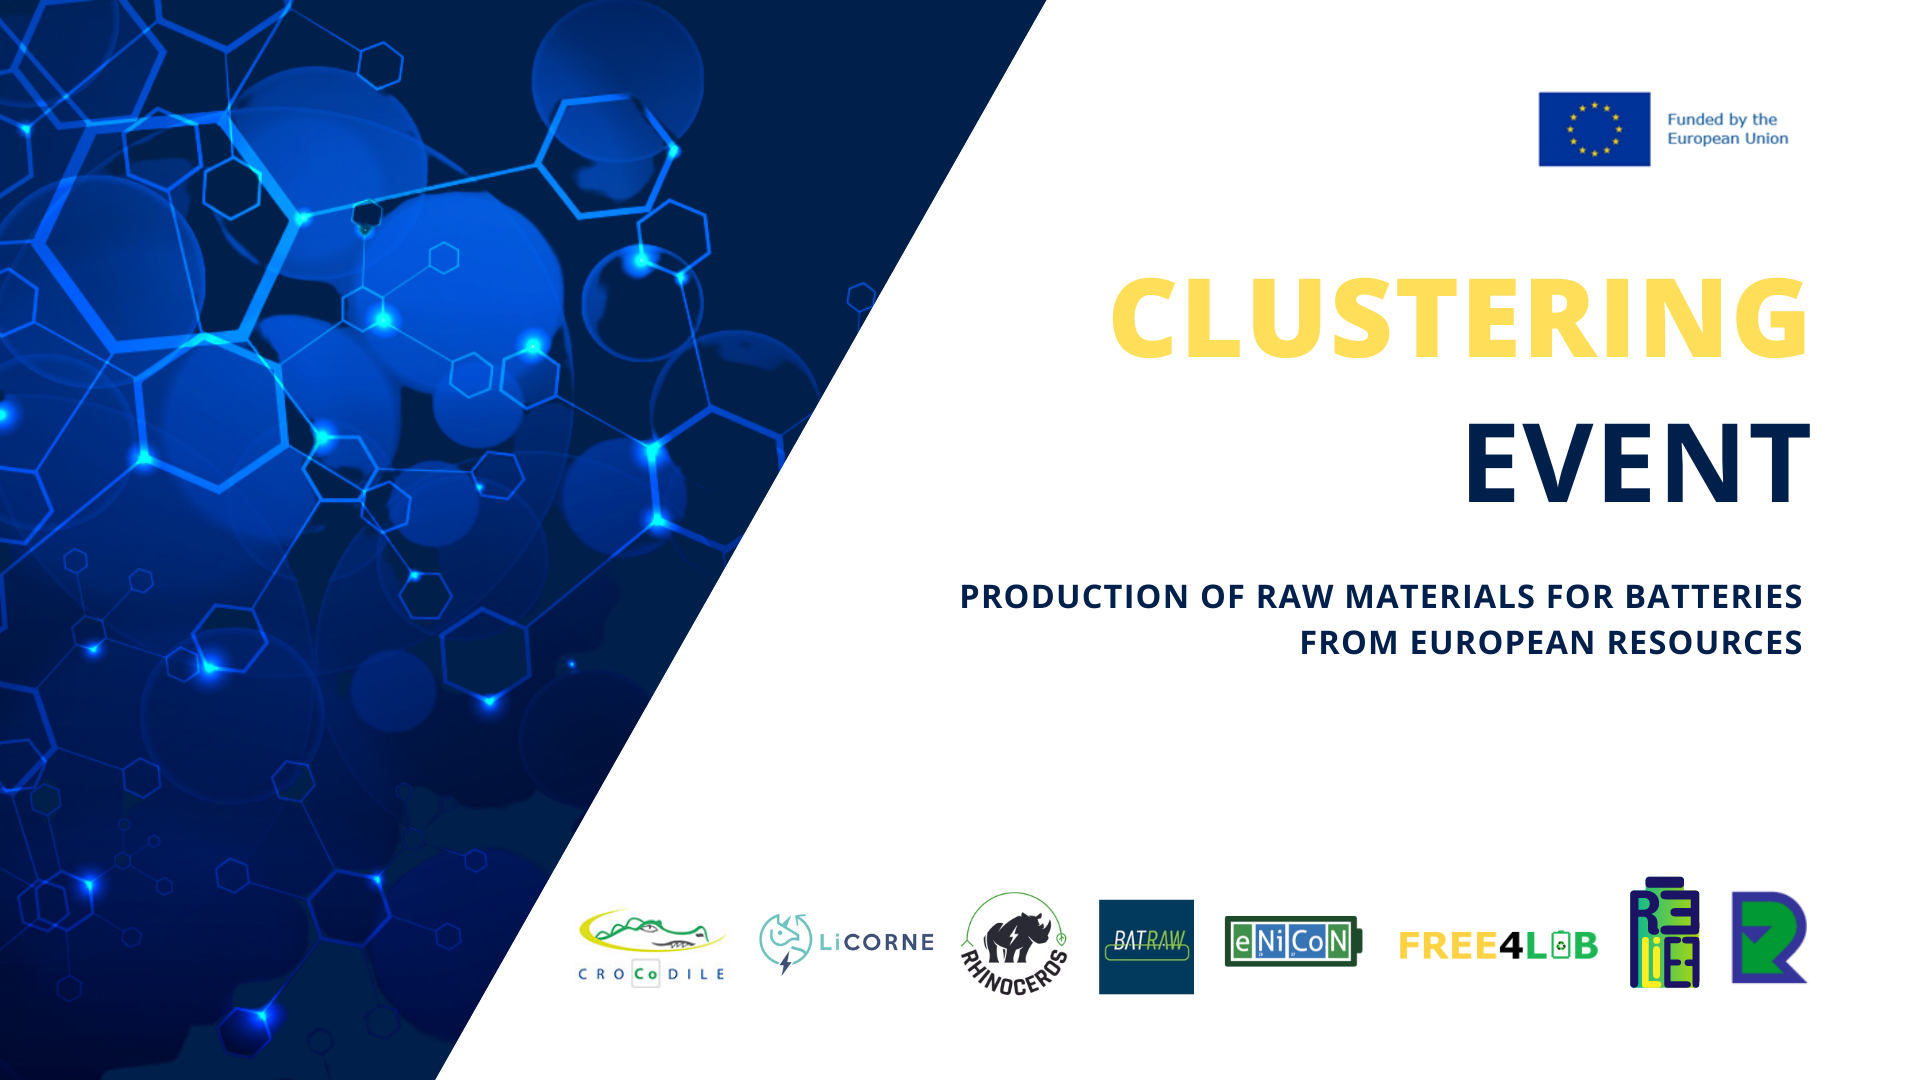 EU-funded projects scaling up knowledge to secure raw materials supply for batteries production